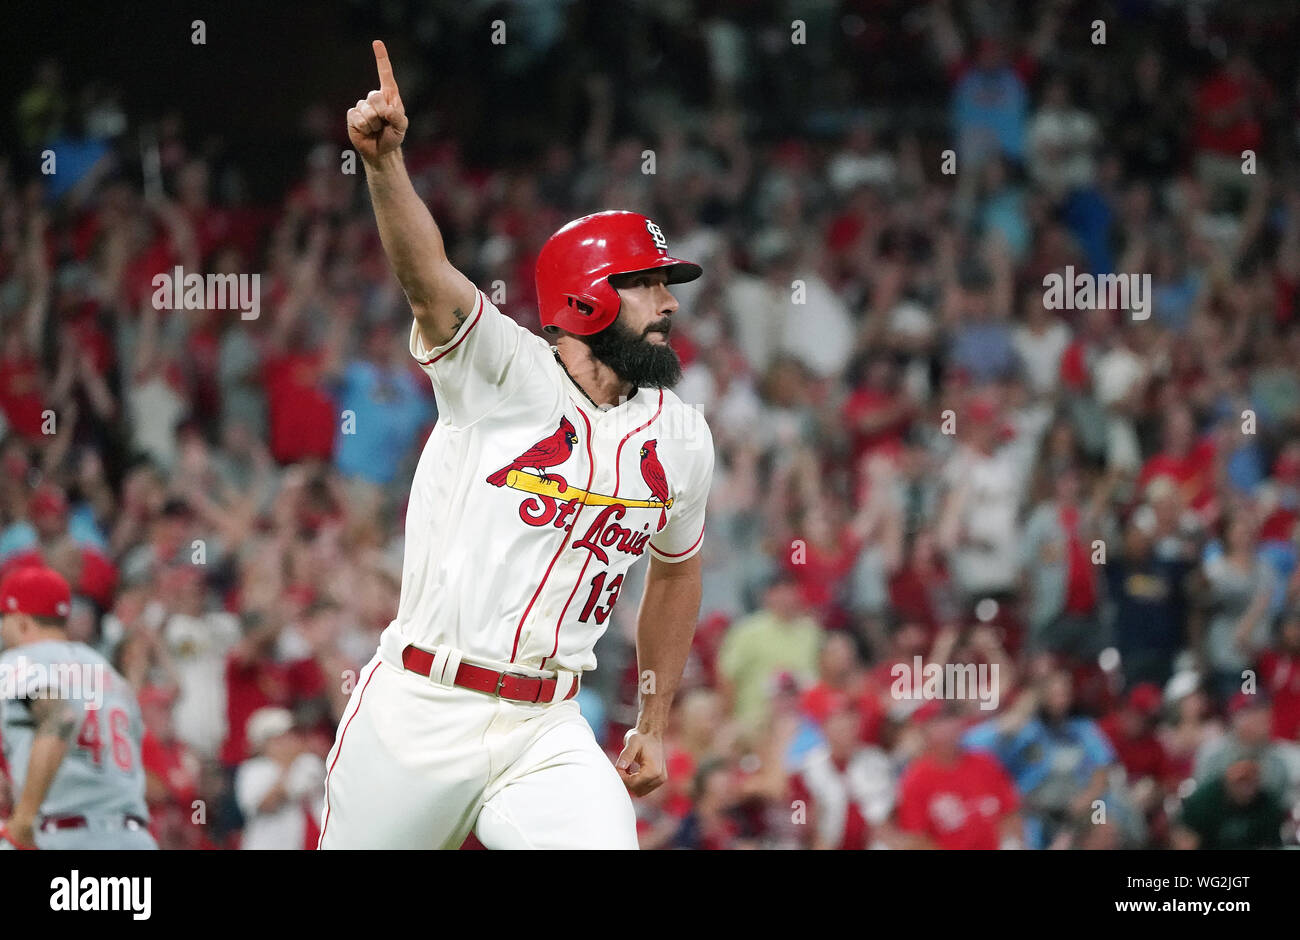 St. Louis Cardinals Matt Carpenter points after hitting the game winning single in the ninth inning to defeat the Cincinnati Reds 3-2 in game 2 of their double header at Busch Stadium in St. Louis on Saturday, August 31, 2019.  Photo by Bill Greenblatt/UPI Stock Photo